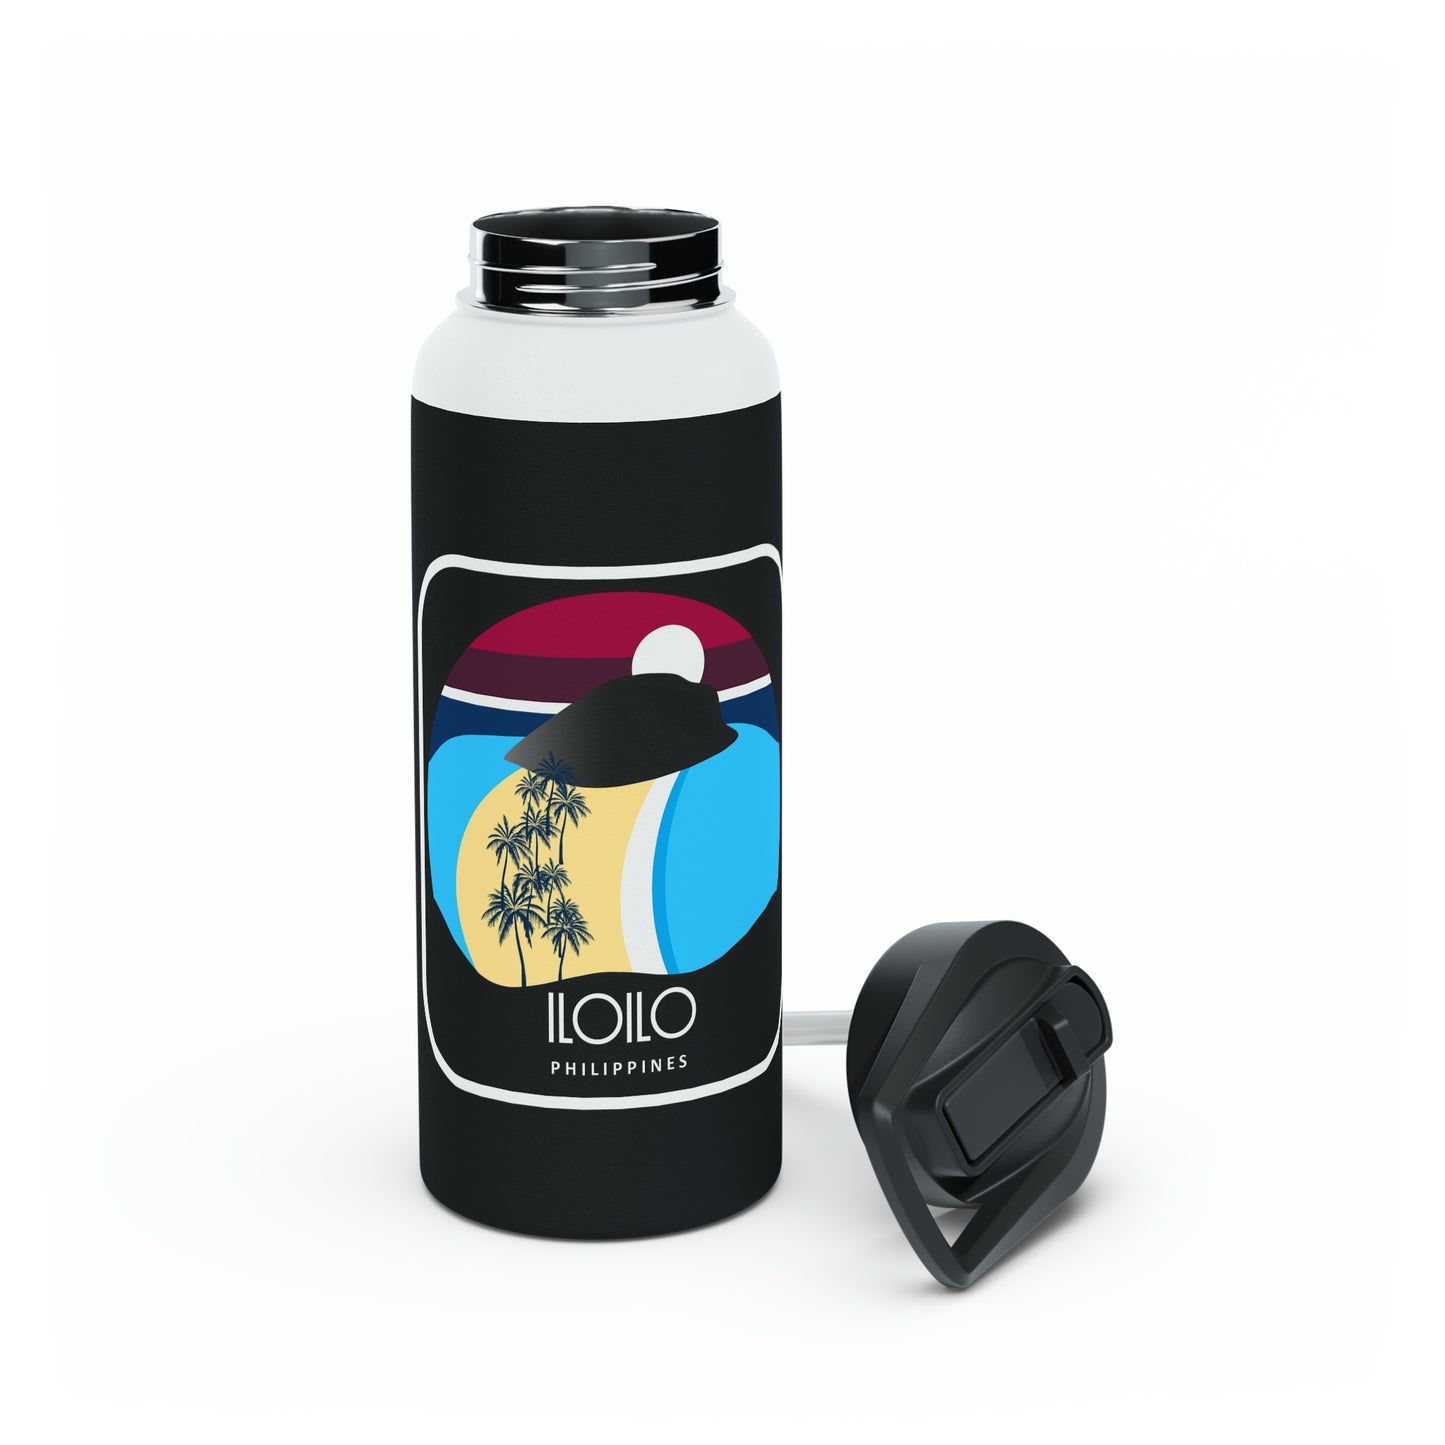 Stainless Steel, Insulated Travel Bottle - Eco Friendly